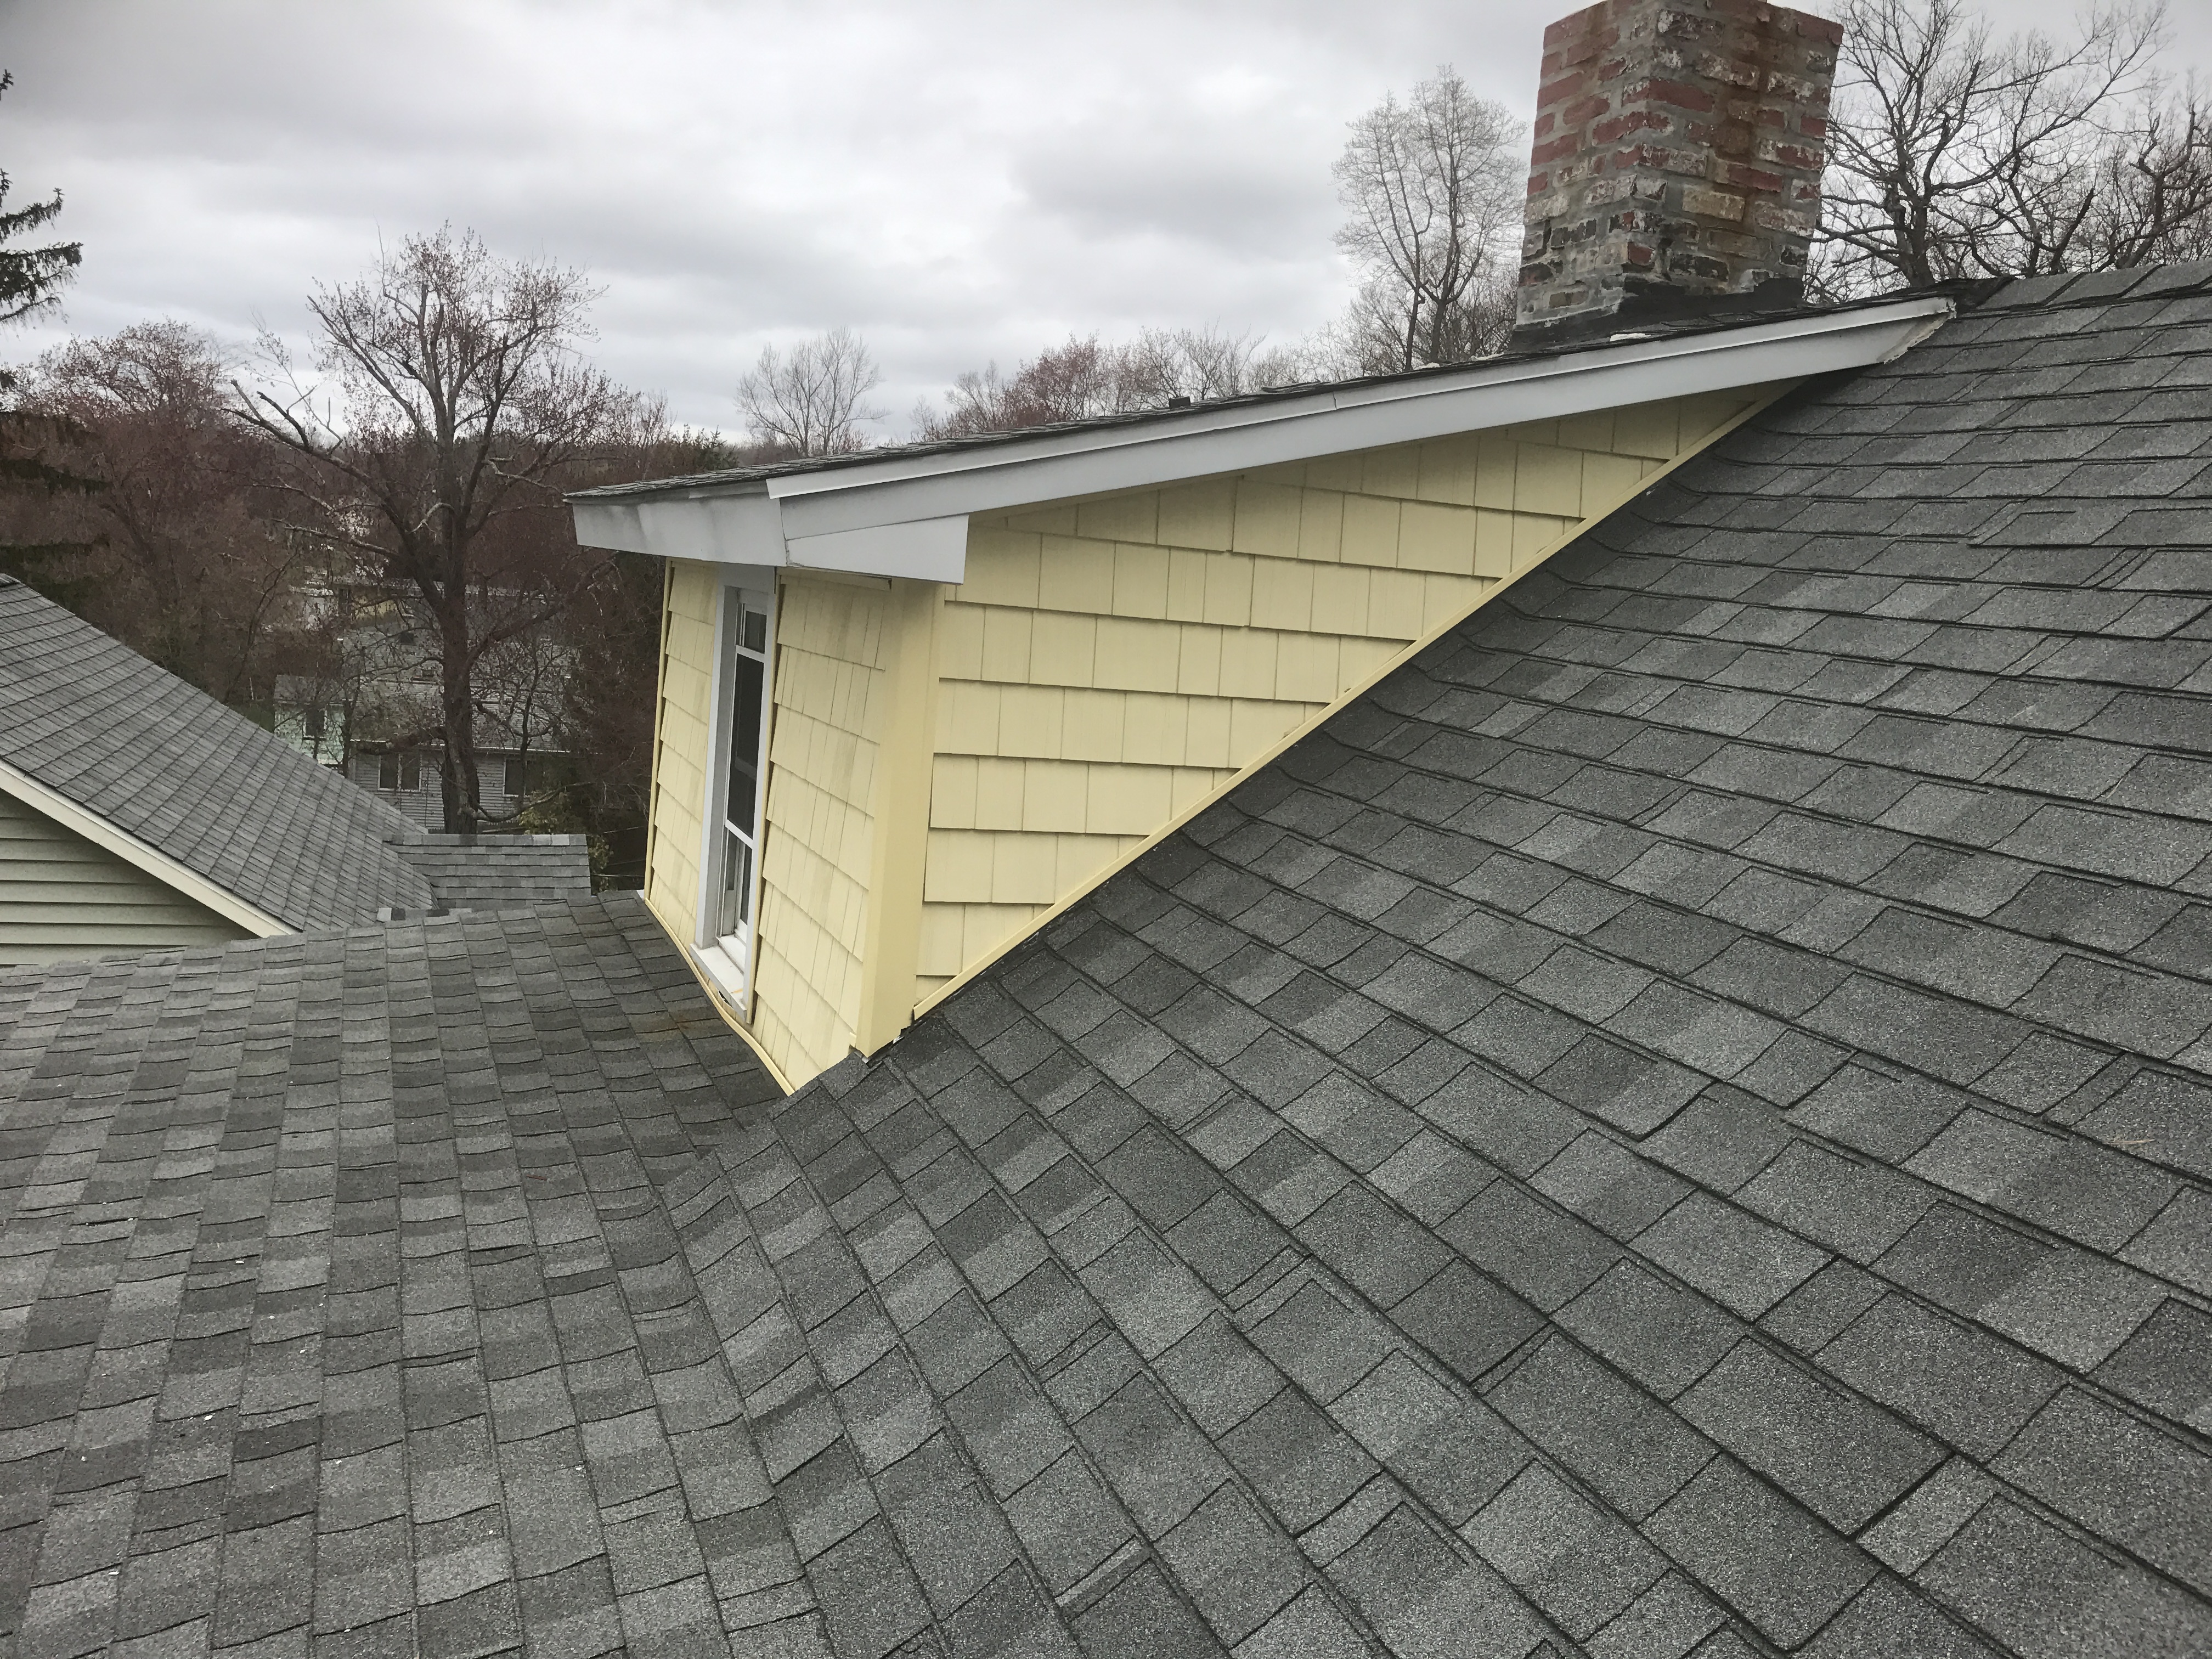 Plymouth, CT - Roof Repair After